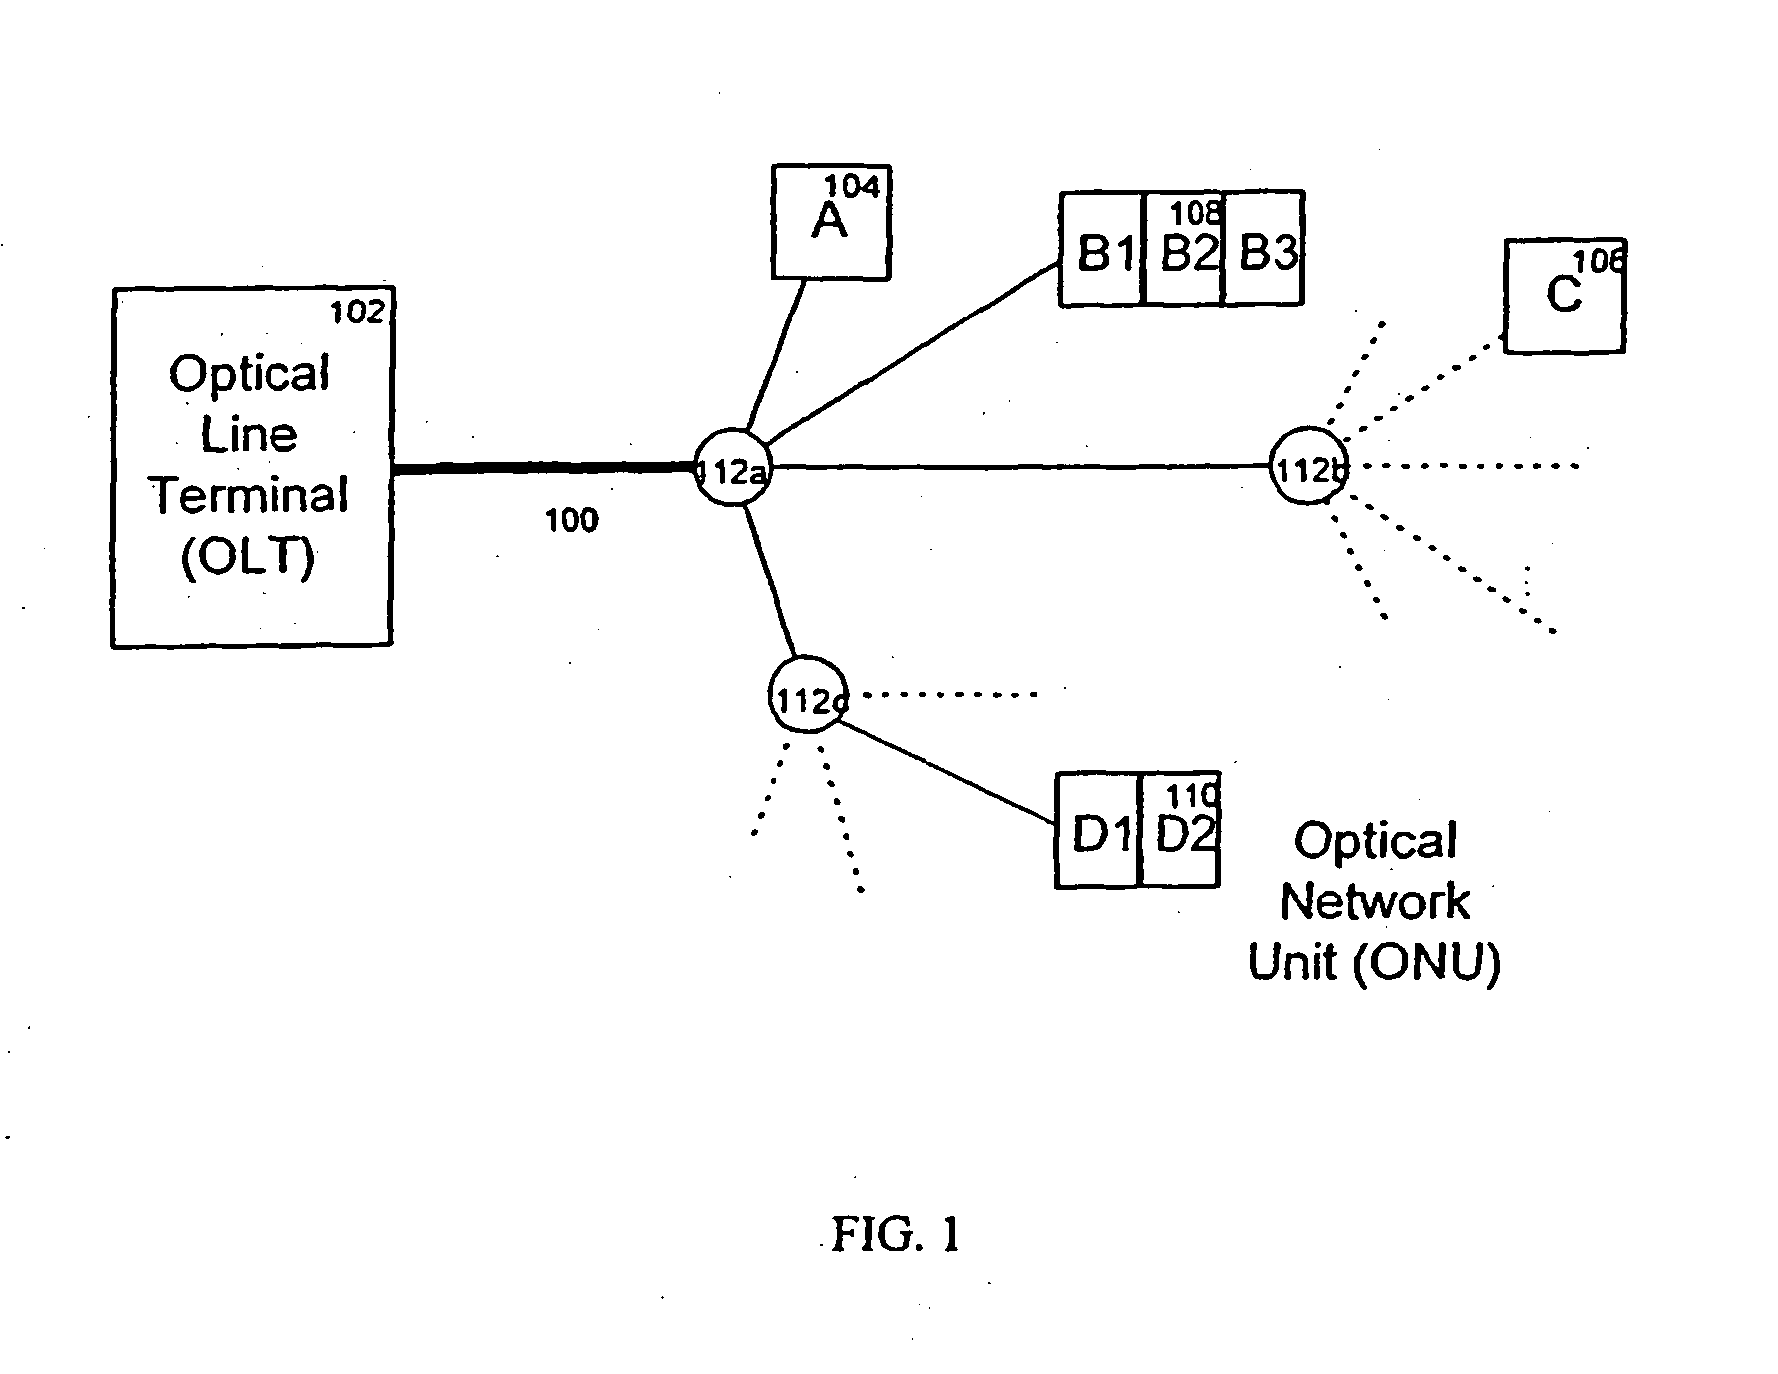 Operations method in an ethernet passive optical network that includes a network unit with multiple entities